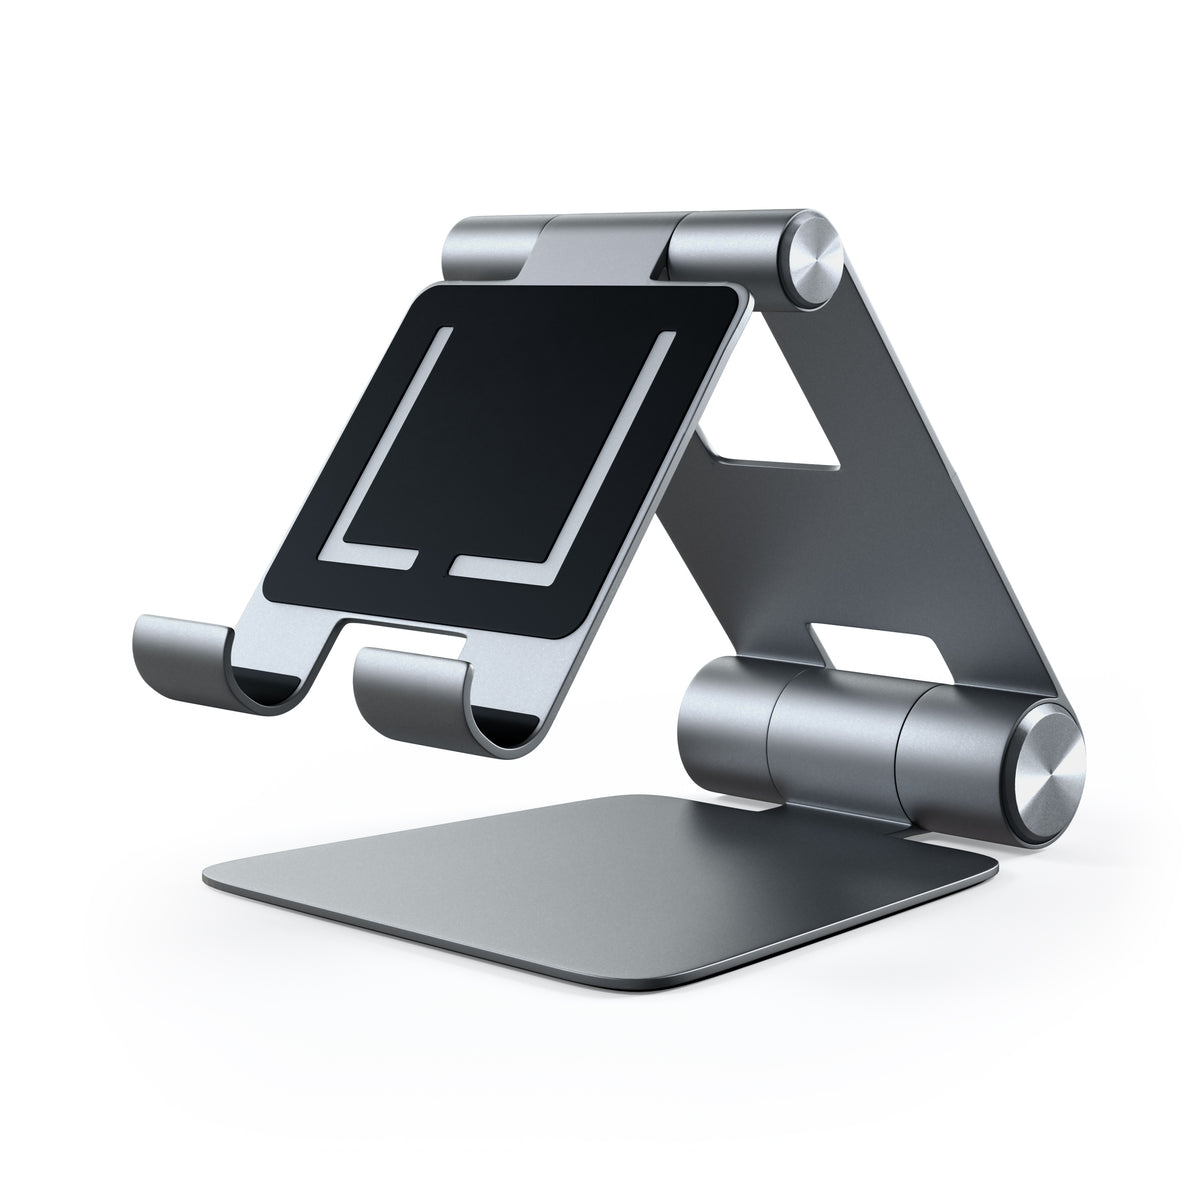 SATECHI R1 Aluminum Multi-Angle Foldable Tablet &amp; Phone Stand - Space Grey